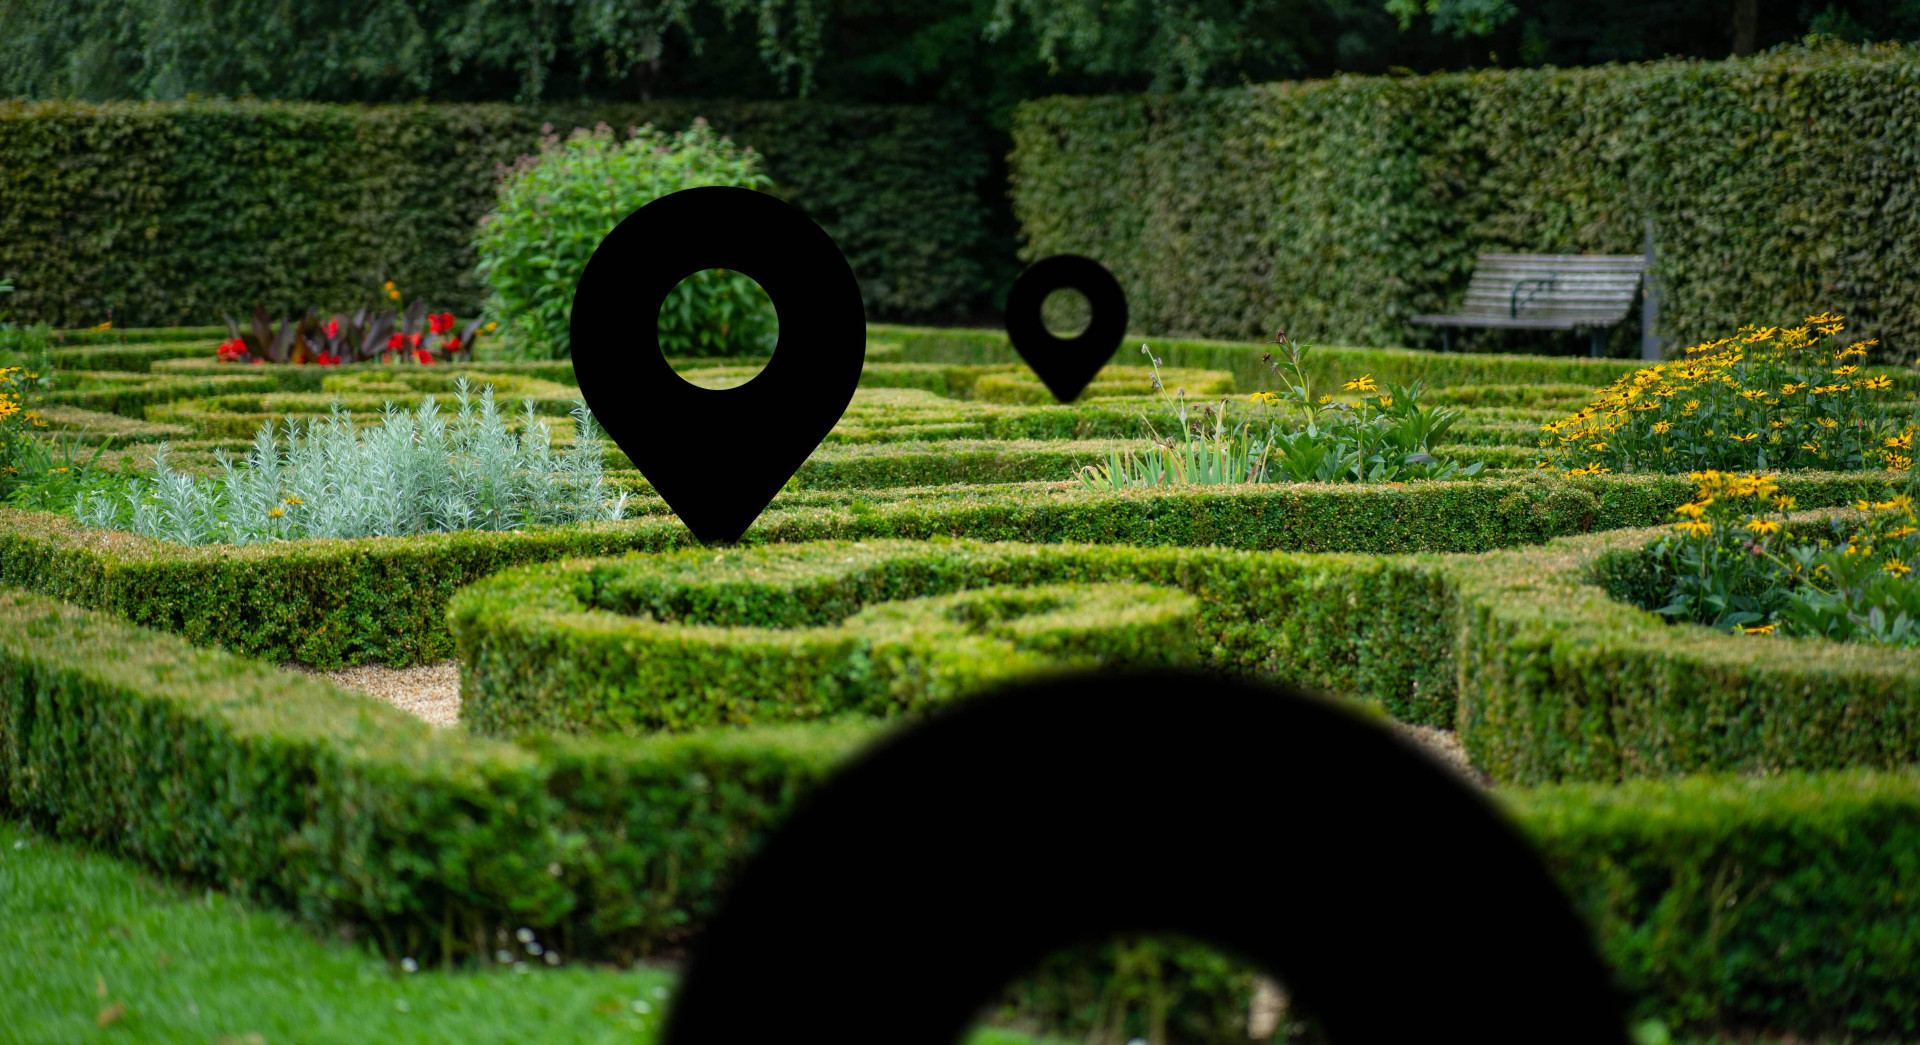 Manicured garden maze with location indicators in it